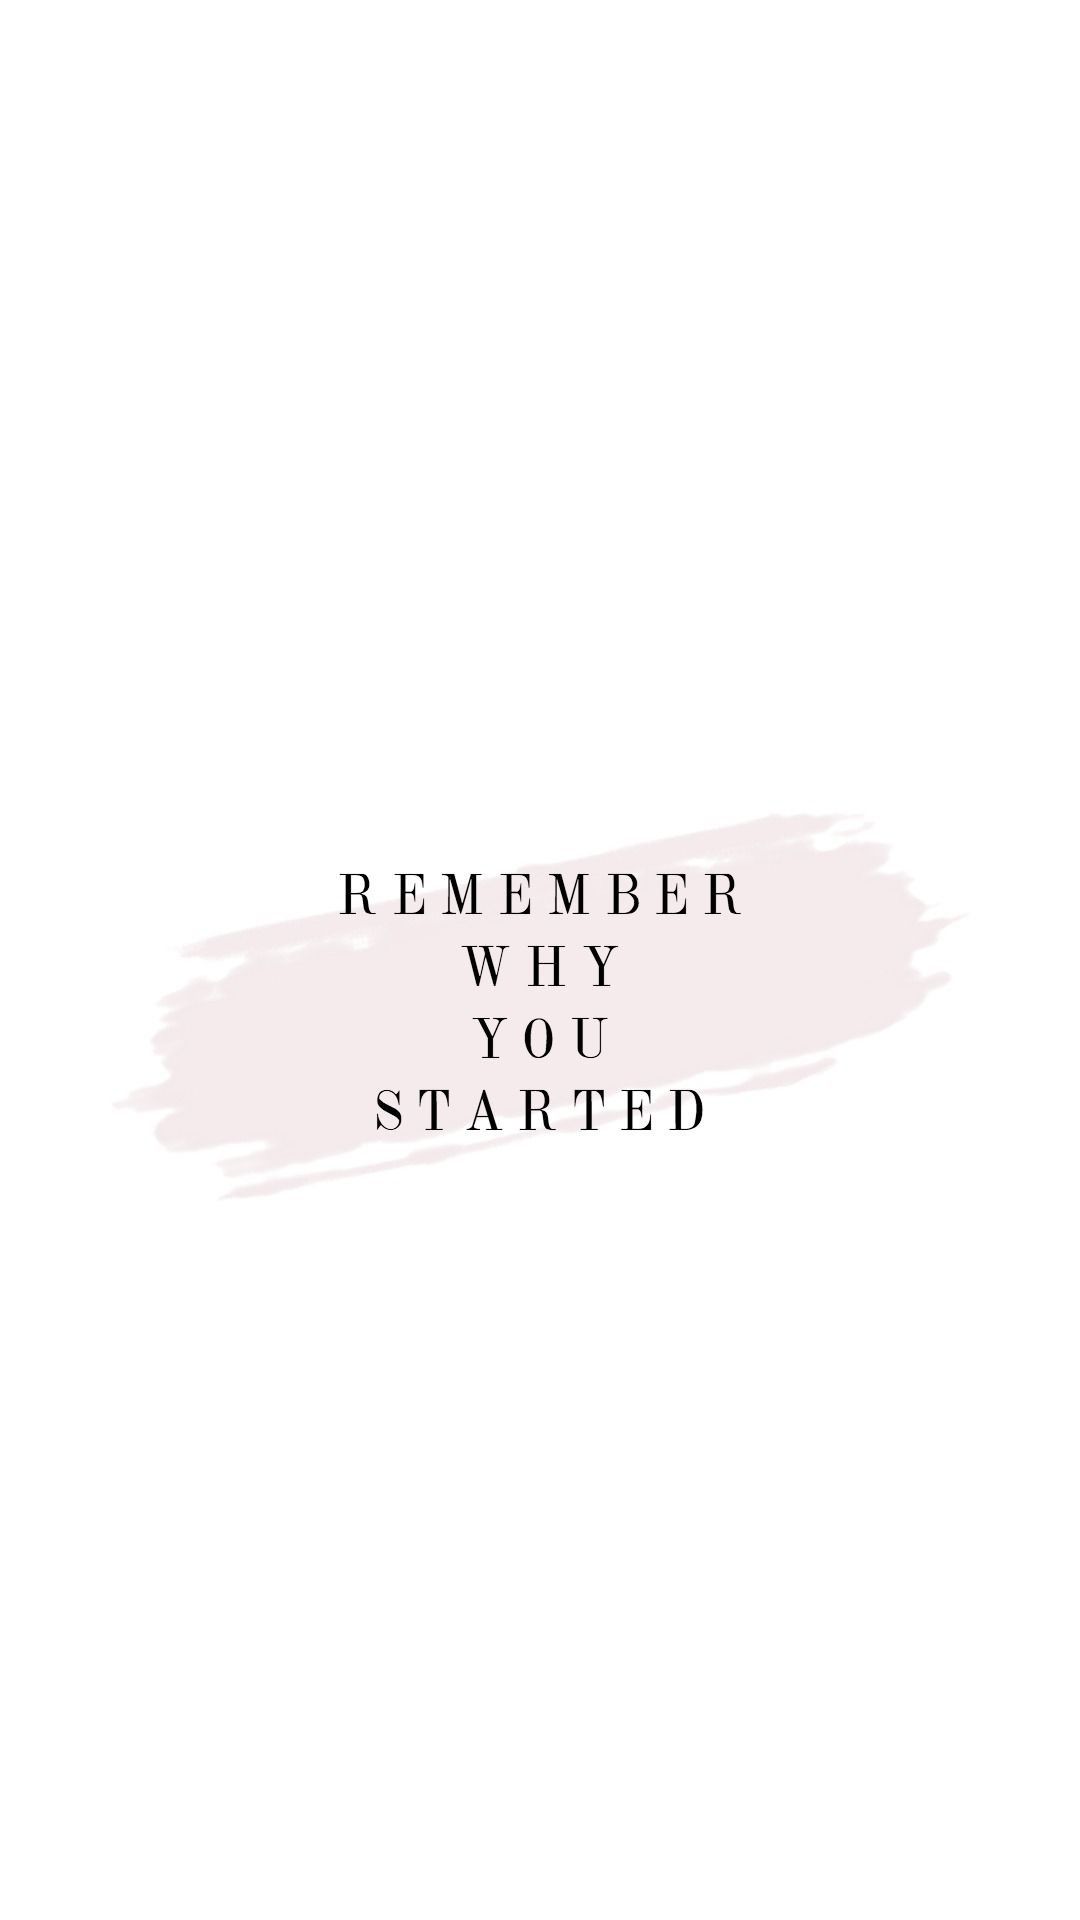 Remember when you started - Positivity